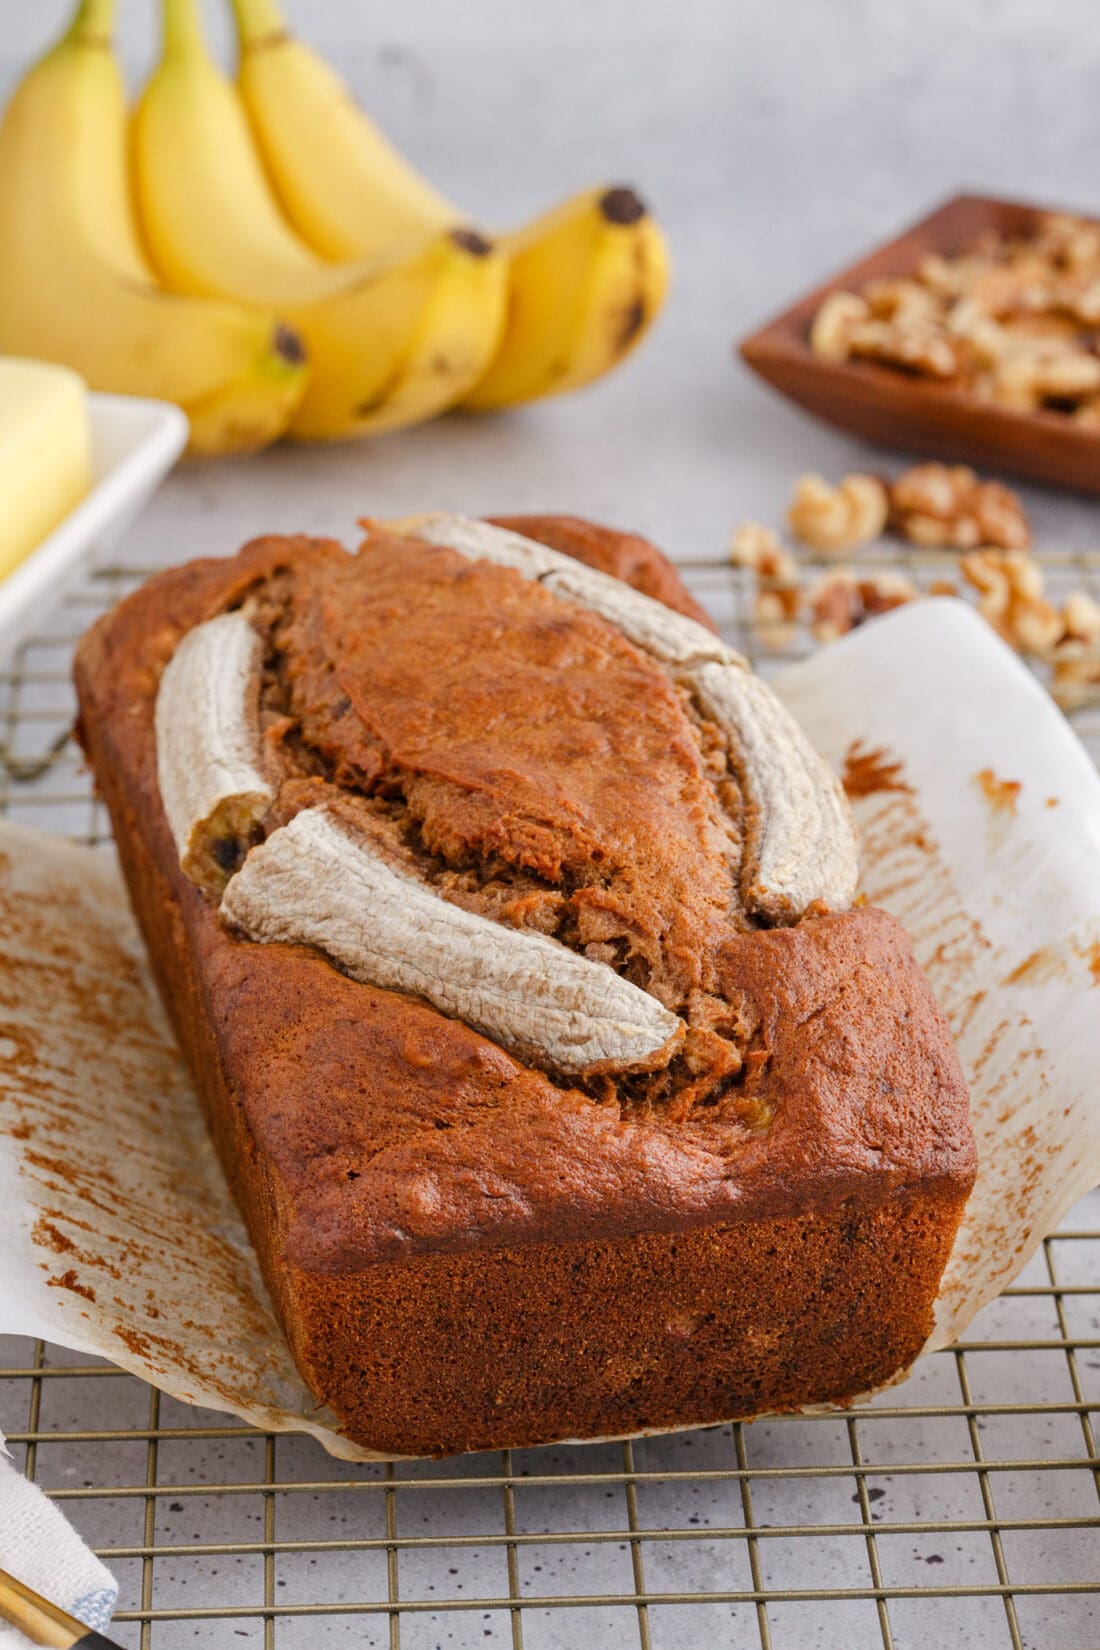 Banana Nut Bread with bananas in the background